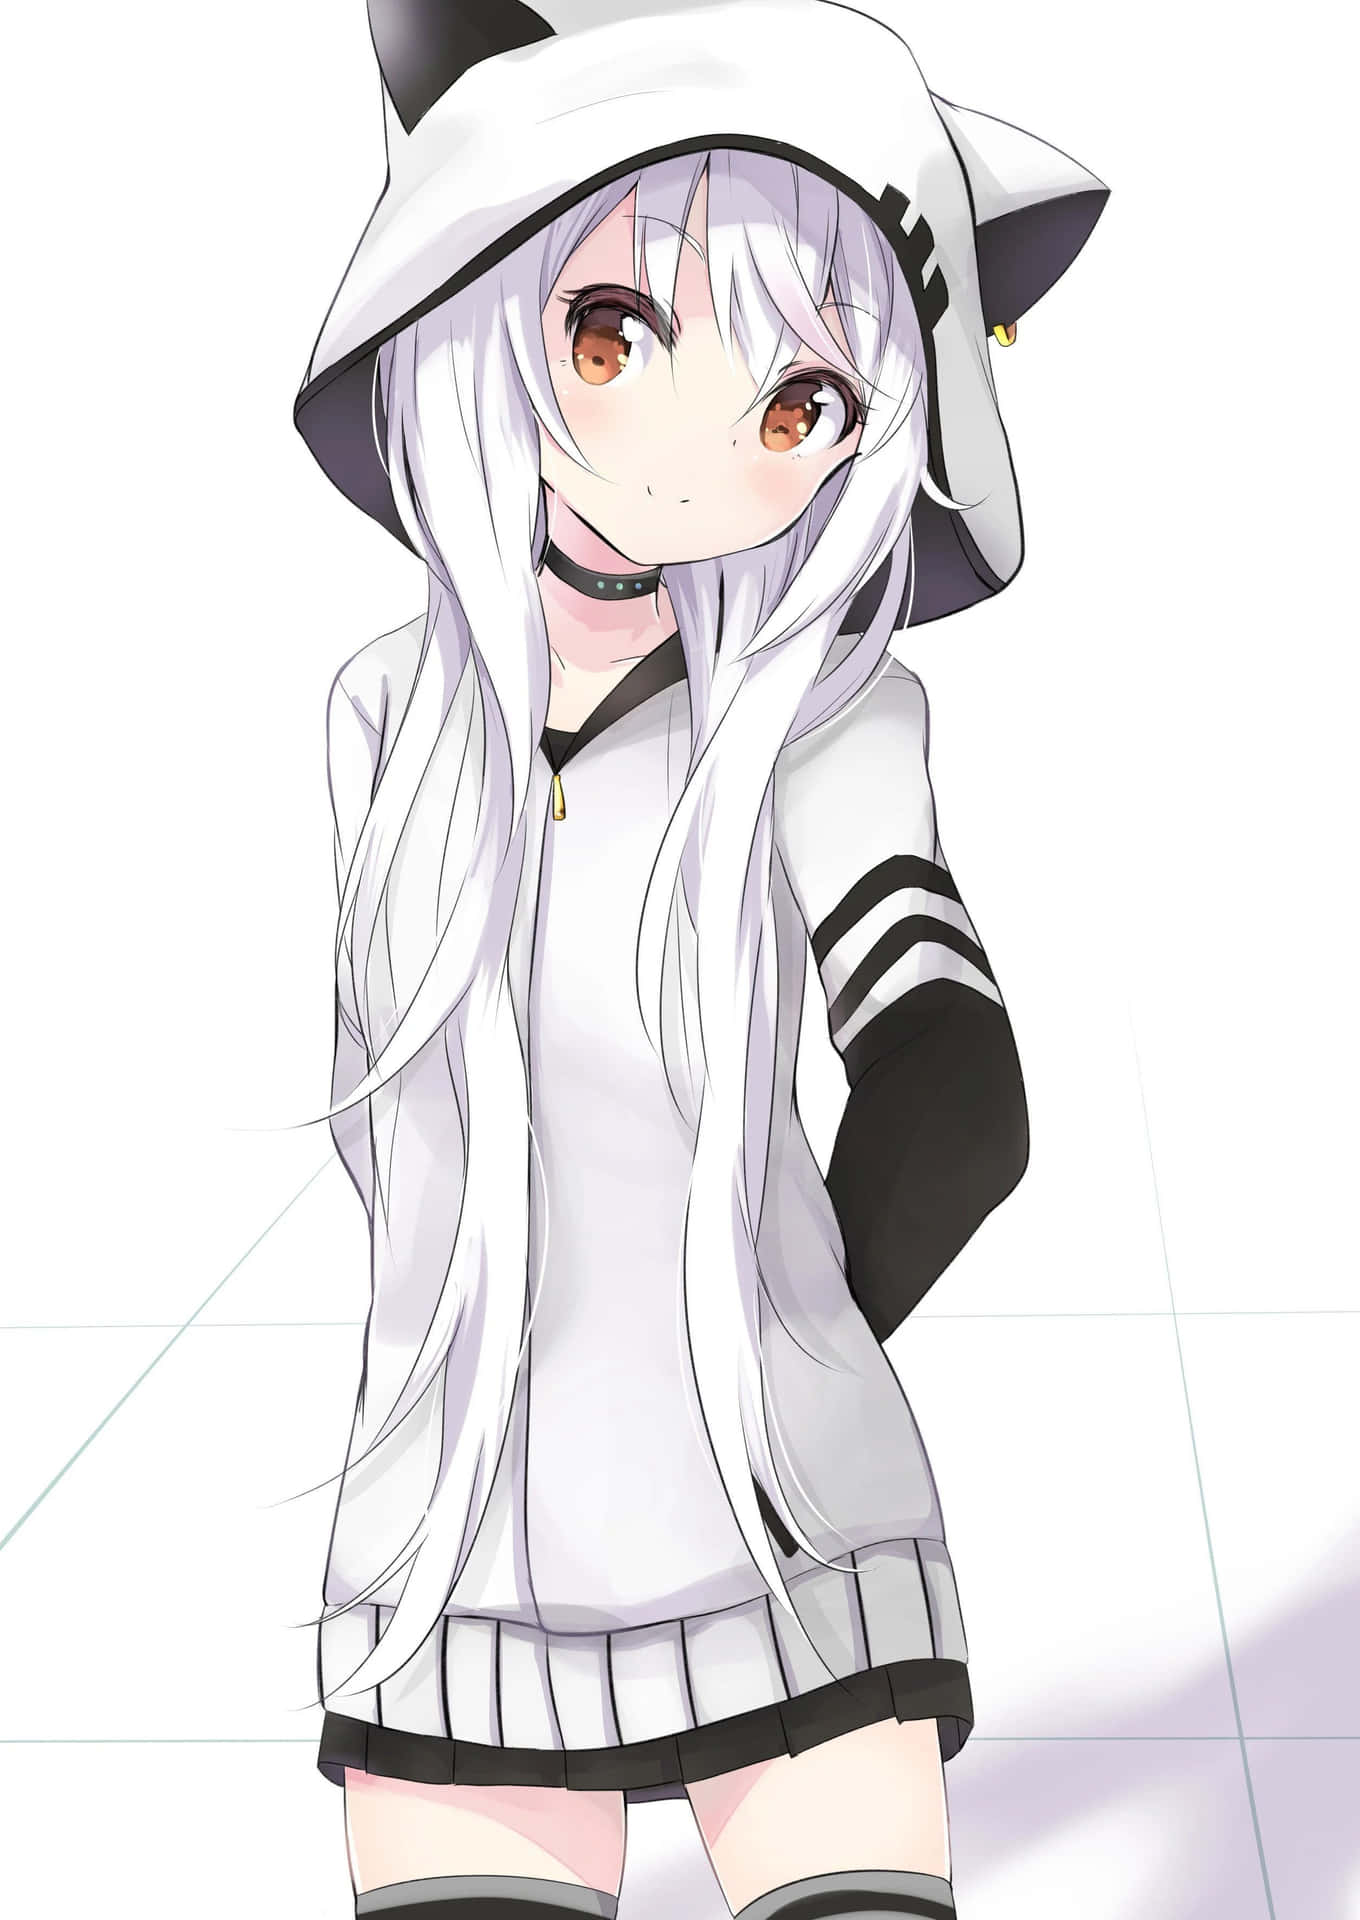 "A cute anime girl in a hooded jacket enjoying a sunny winter day."